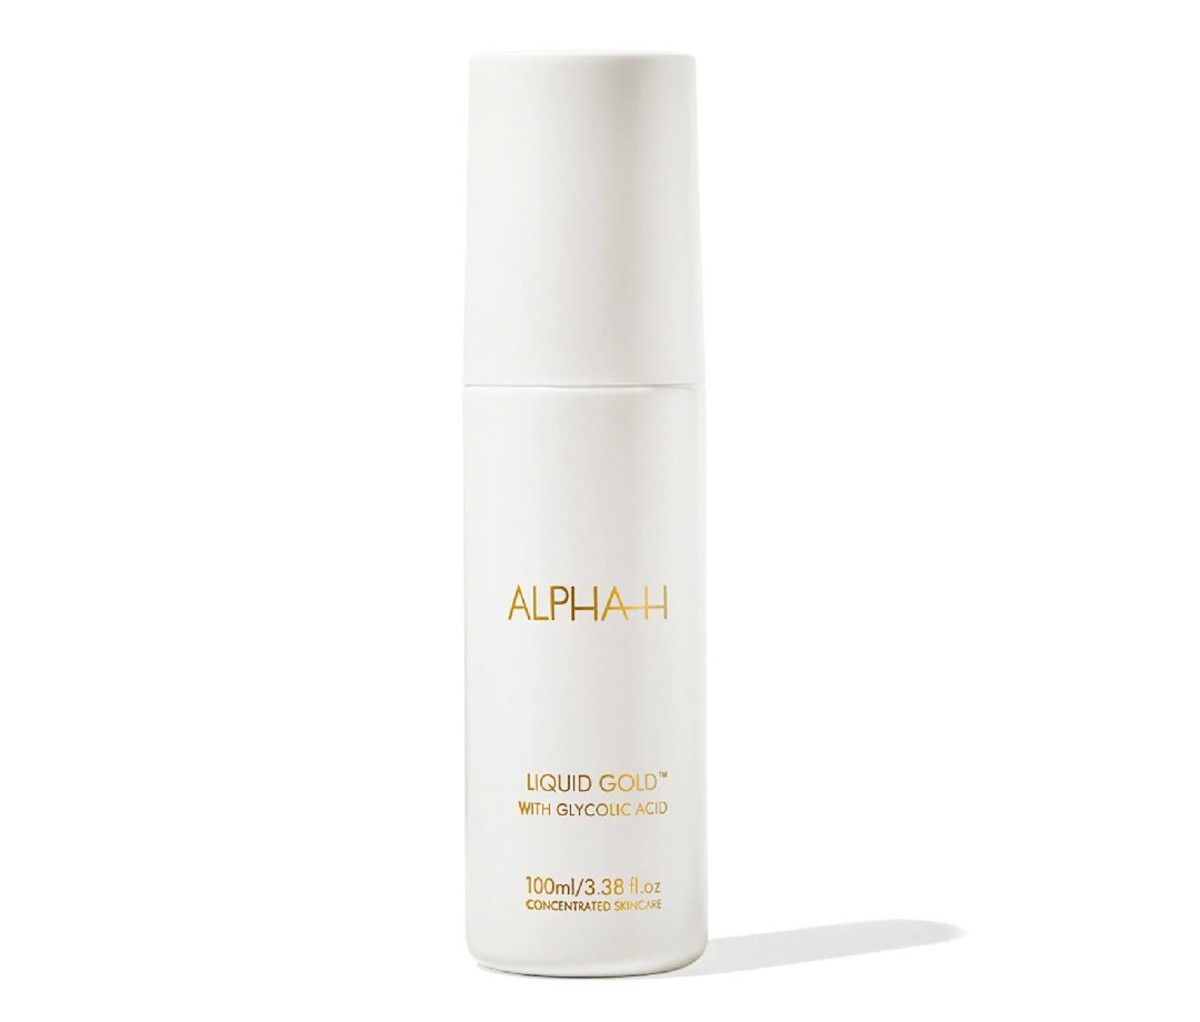 White container of Alpha-H Liquid Gold with Glycolic Acid